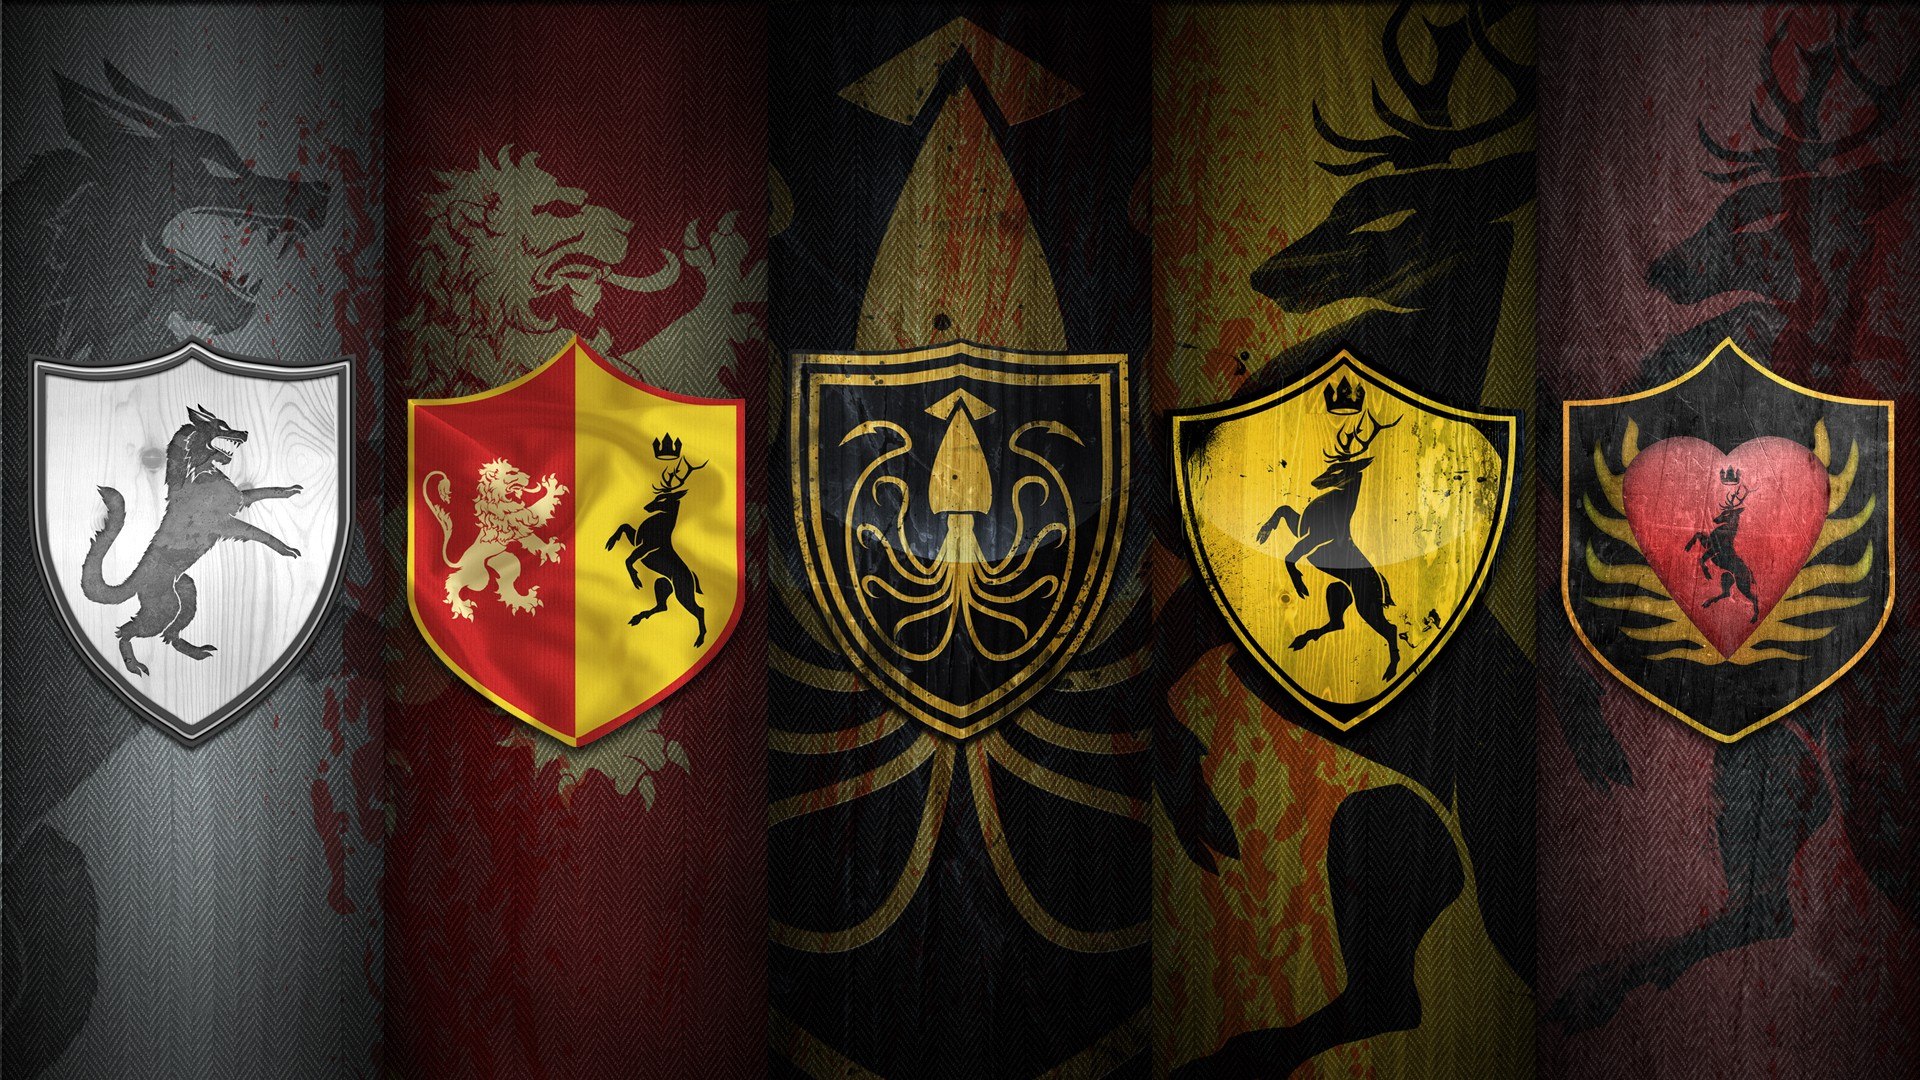 5 Game of Thrones Resources Every Obsessed Fan Needs!